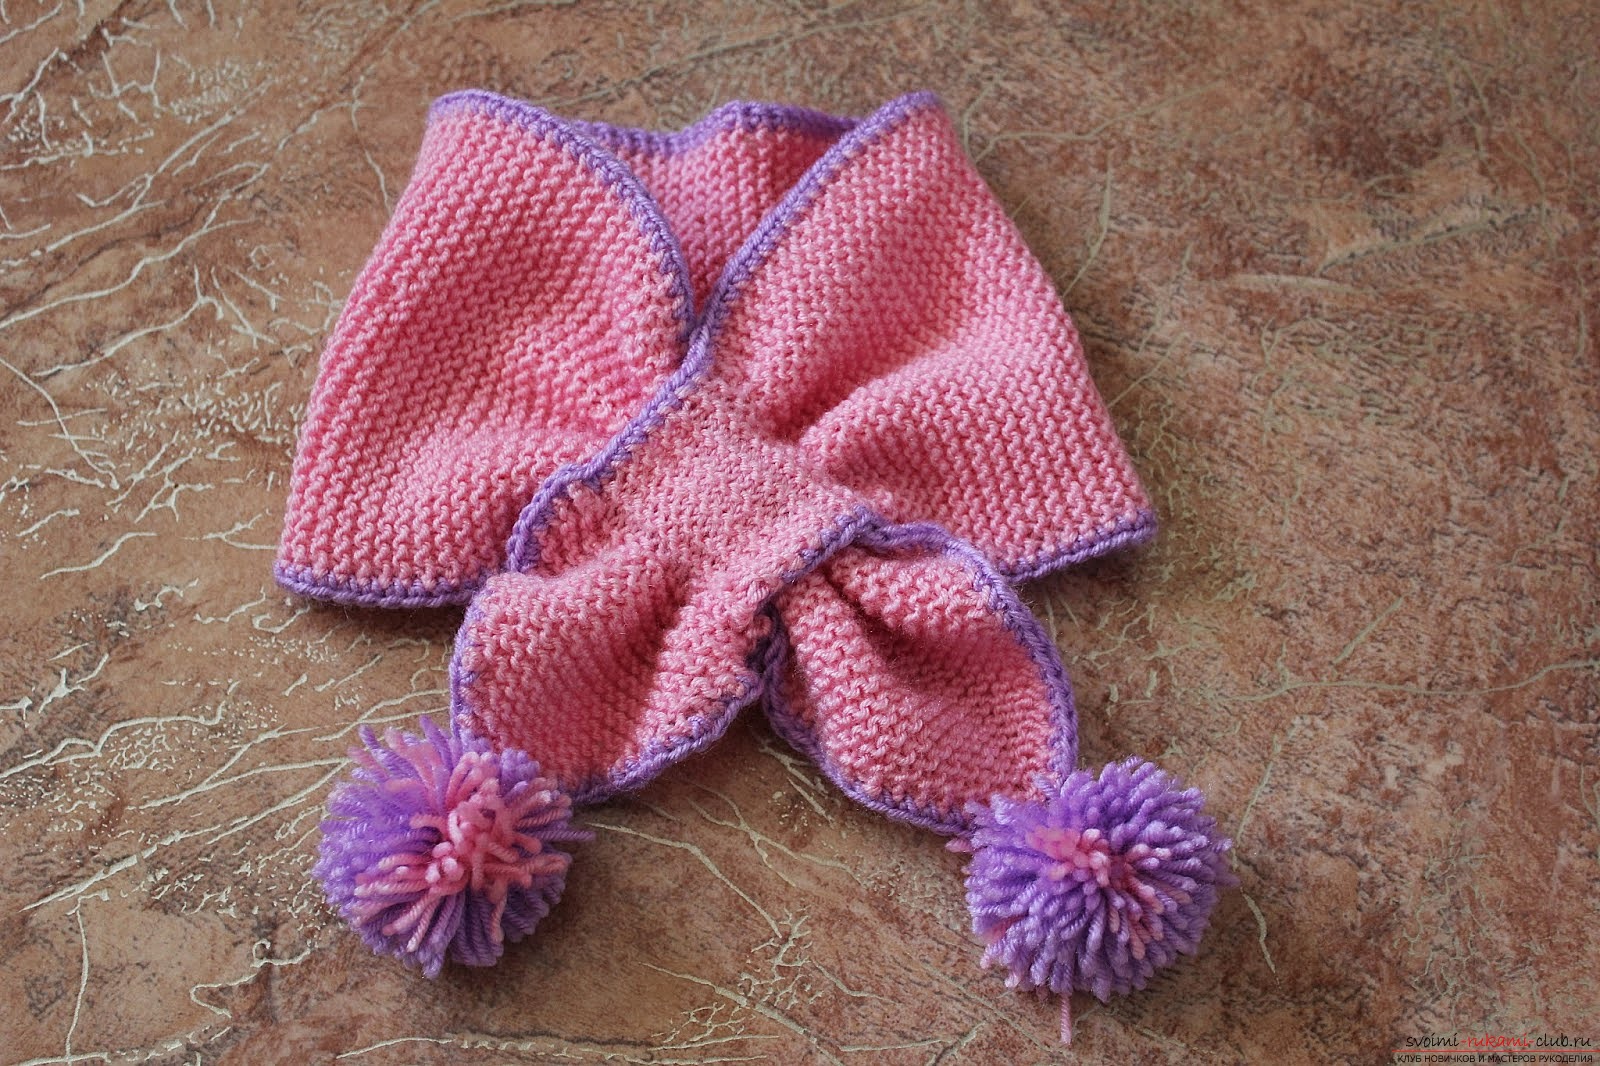 children's scarf without knot. Photo # 2